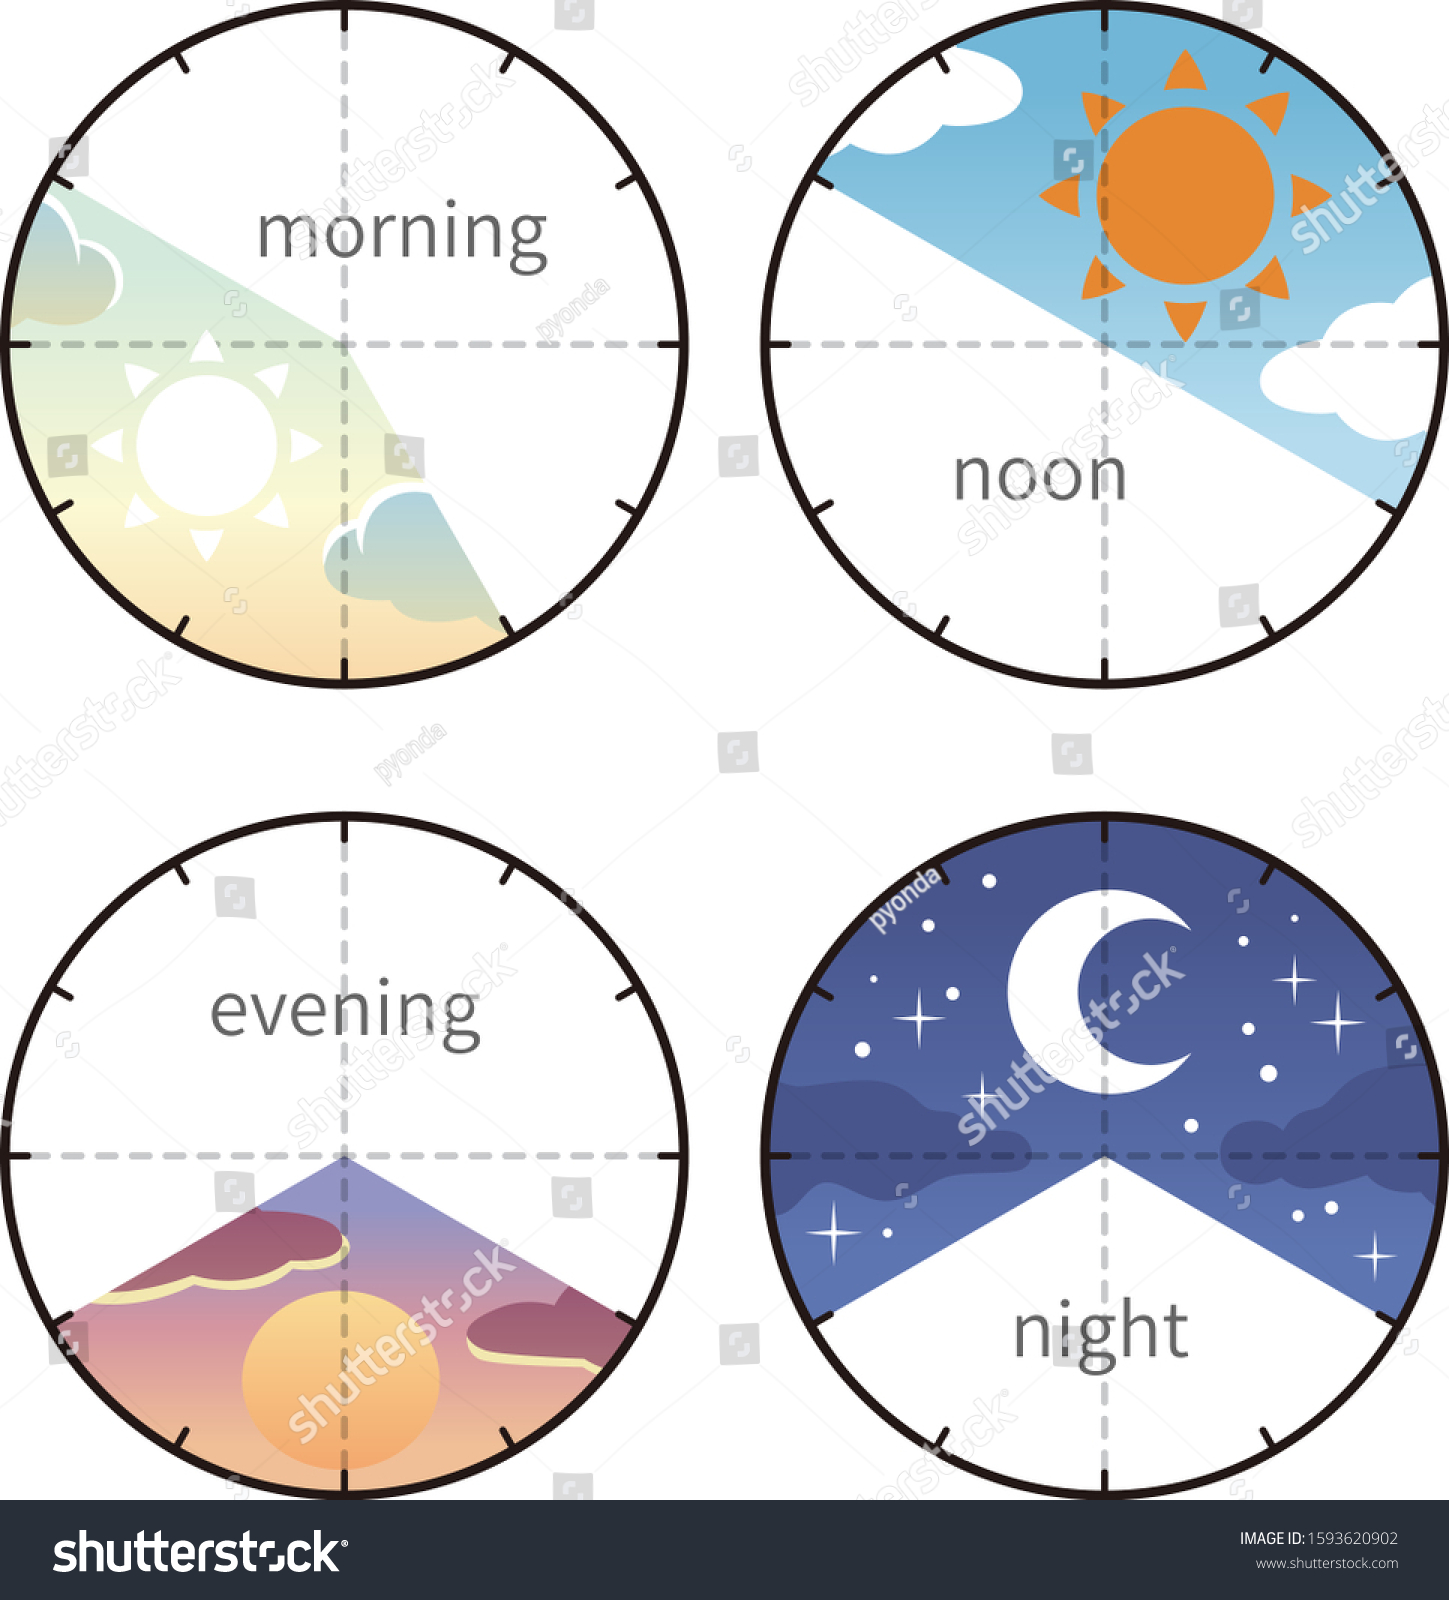 Morning, noon, evening, night time zone icons